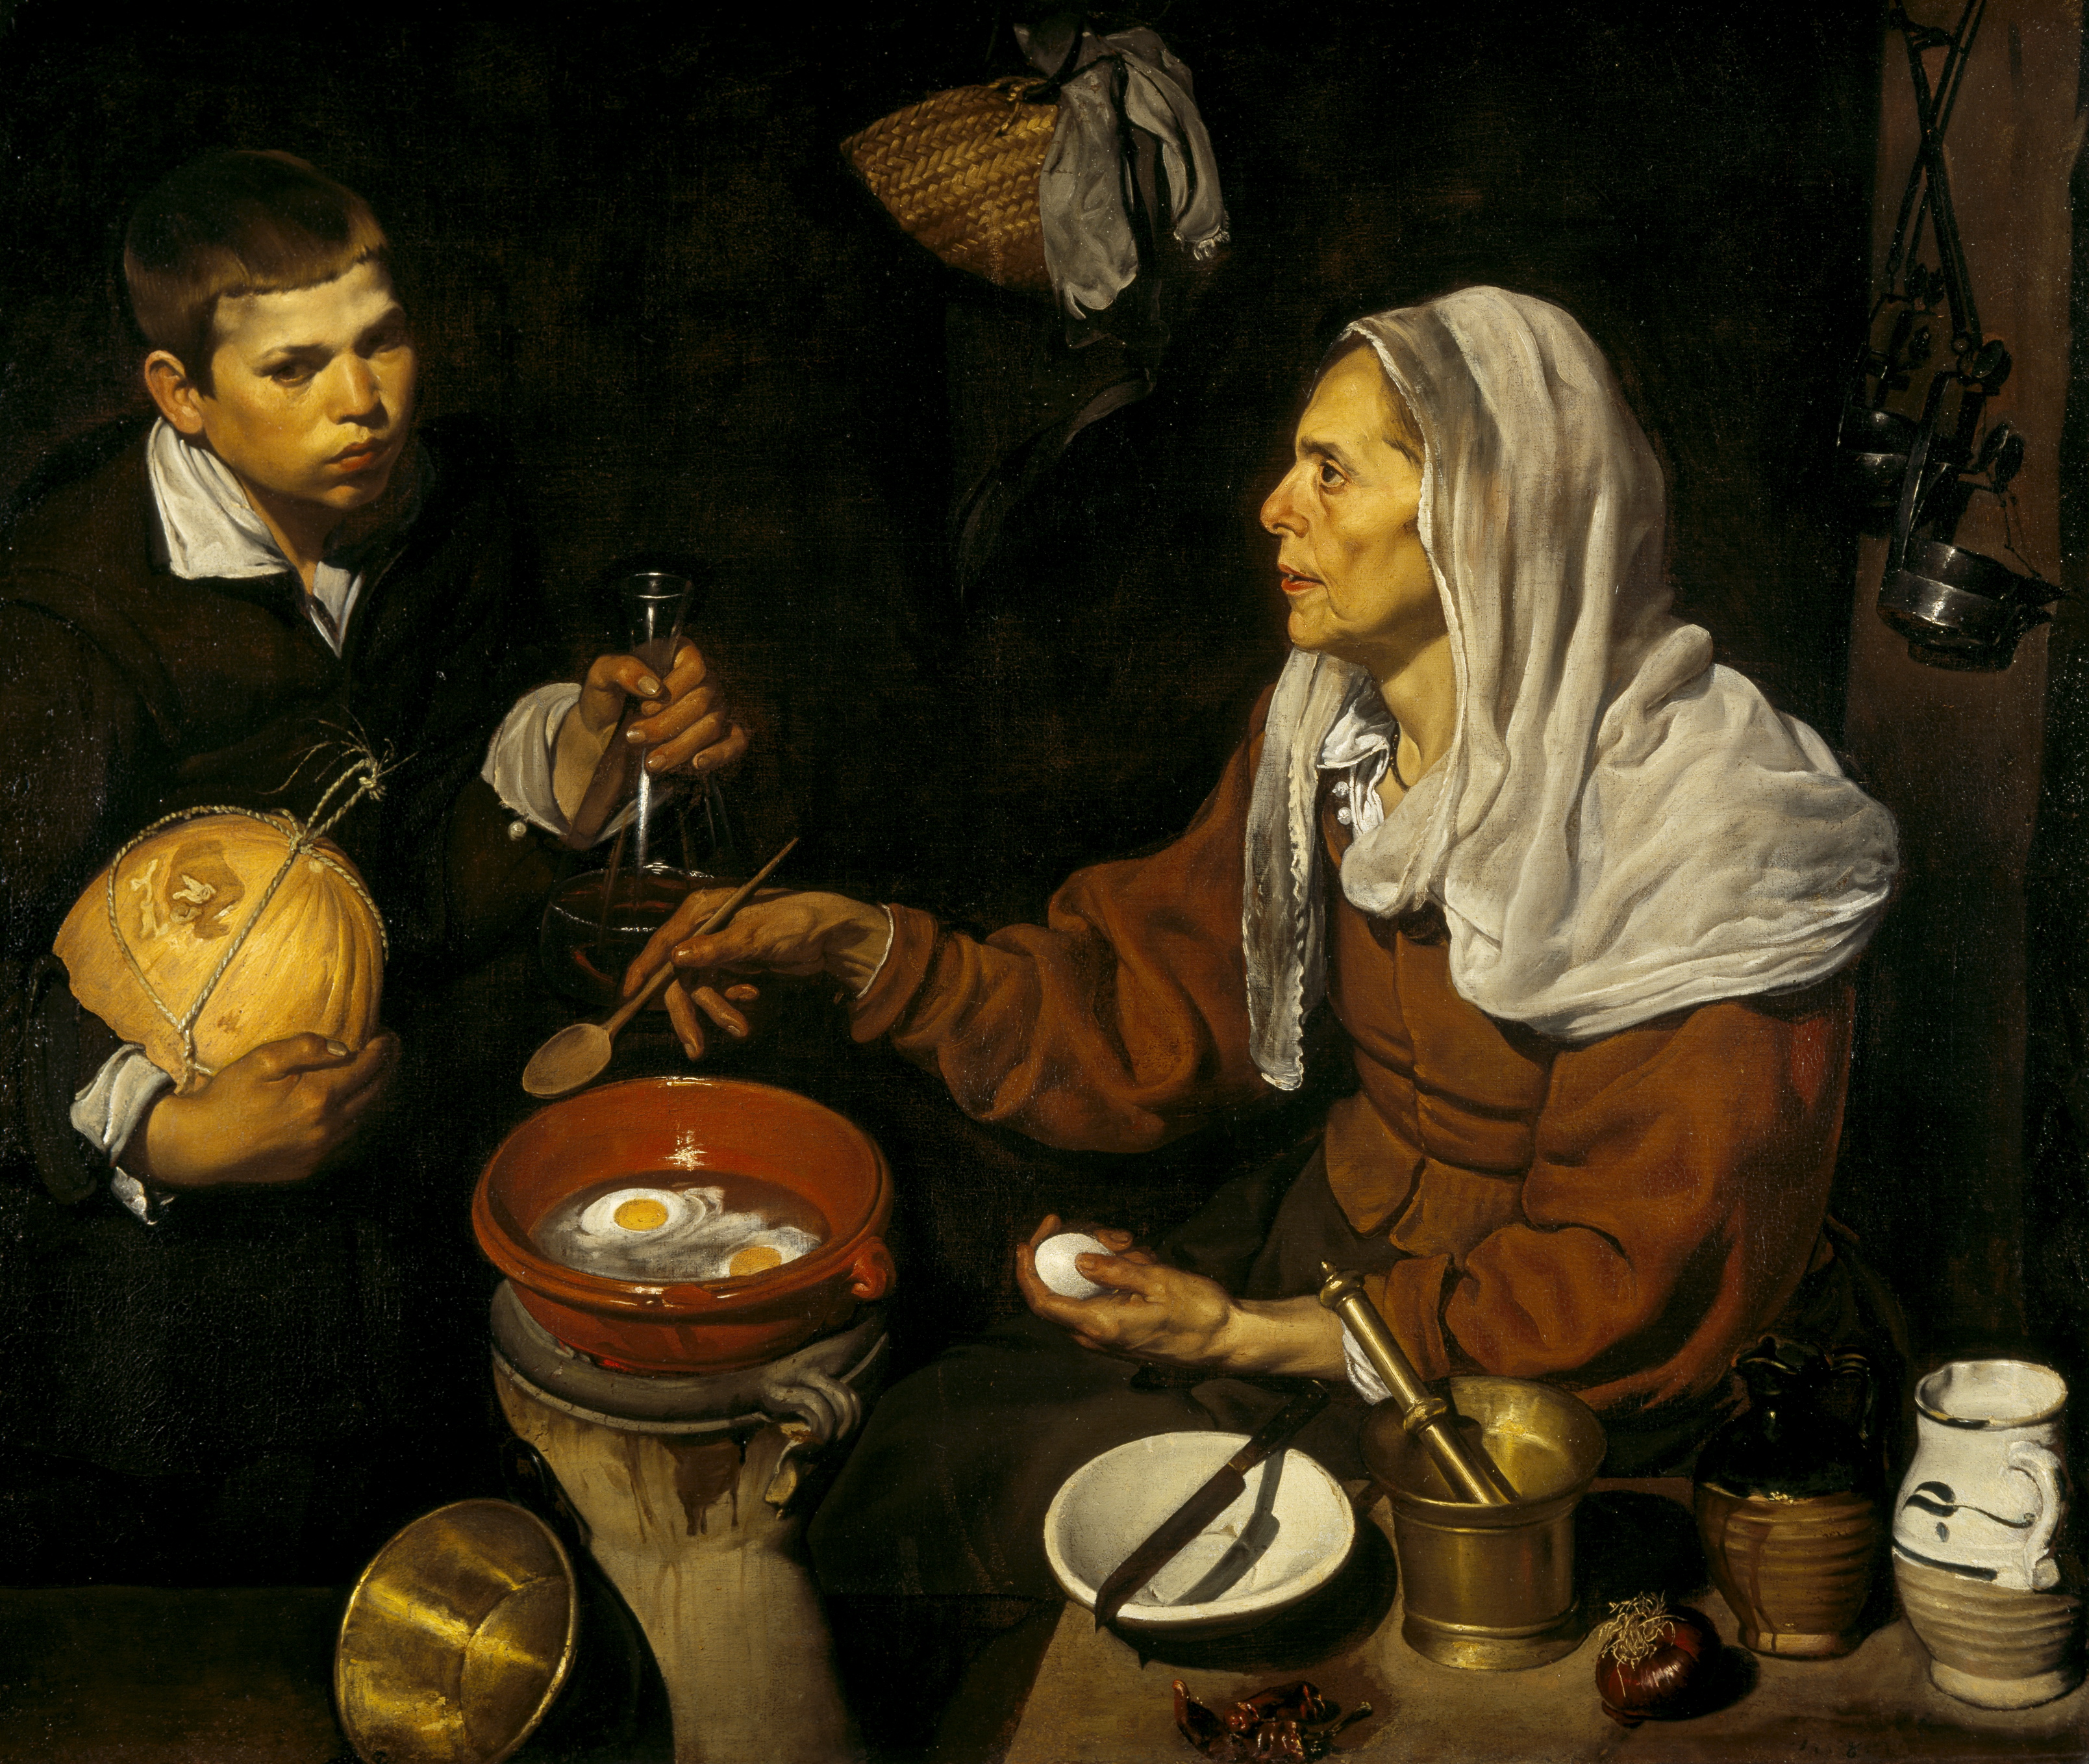 Diego Velázquez An old woman cooking eggs 1618 oil on canvas 100.5 x 119.5 cm Scottish National Gallery, Edinburgh © Trustees of the National Galleries of Scotland ***This image may only be used in conjunction with editorial coverage of The Greats exhibition, 24 Oct 2015 - 14 Feb 2016, at the Art Gallery of New South Wales. This image may not be cropped or overwritten. Prior approval in writing required for use as a cover. Caption details must accompany reproduction of the image. *** Media contact: Lisa.Catt@ag.nsw.gov.au *** Local Caption *** ***This image may only be used in conjunction with editorial coverage of The Greats exhibition, 24 Oct 2015 - 14 Feb 2016, at the Art Gallery of New South Wales. This image may not be cropped or overwritten. Prior approval in writing required for use as a cover. Caption details must accompany reproduction of the image. *** Media contact: Lisa.Catt@ag.nsw.gov.au